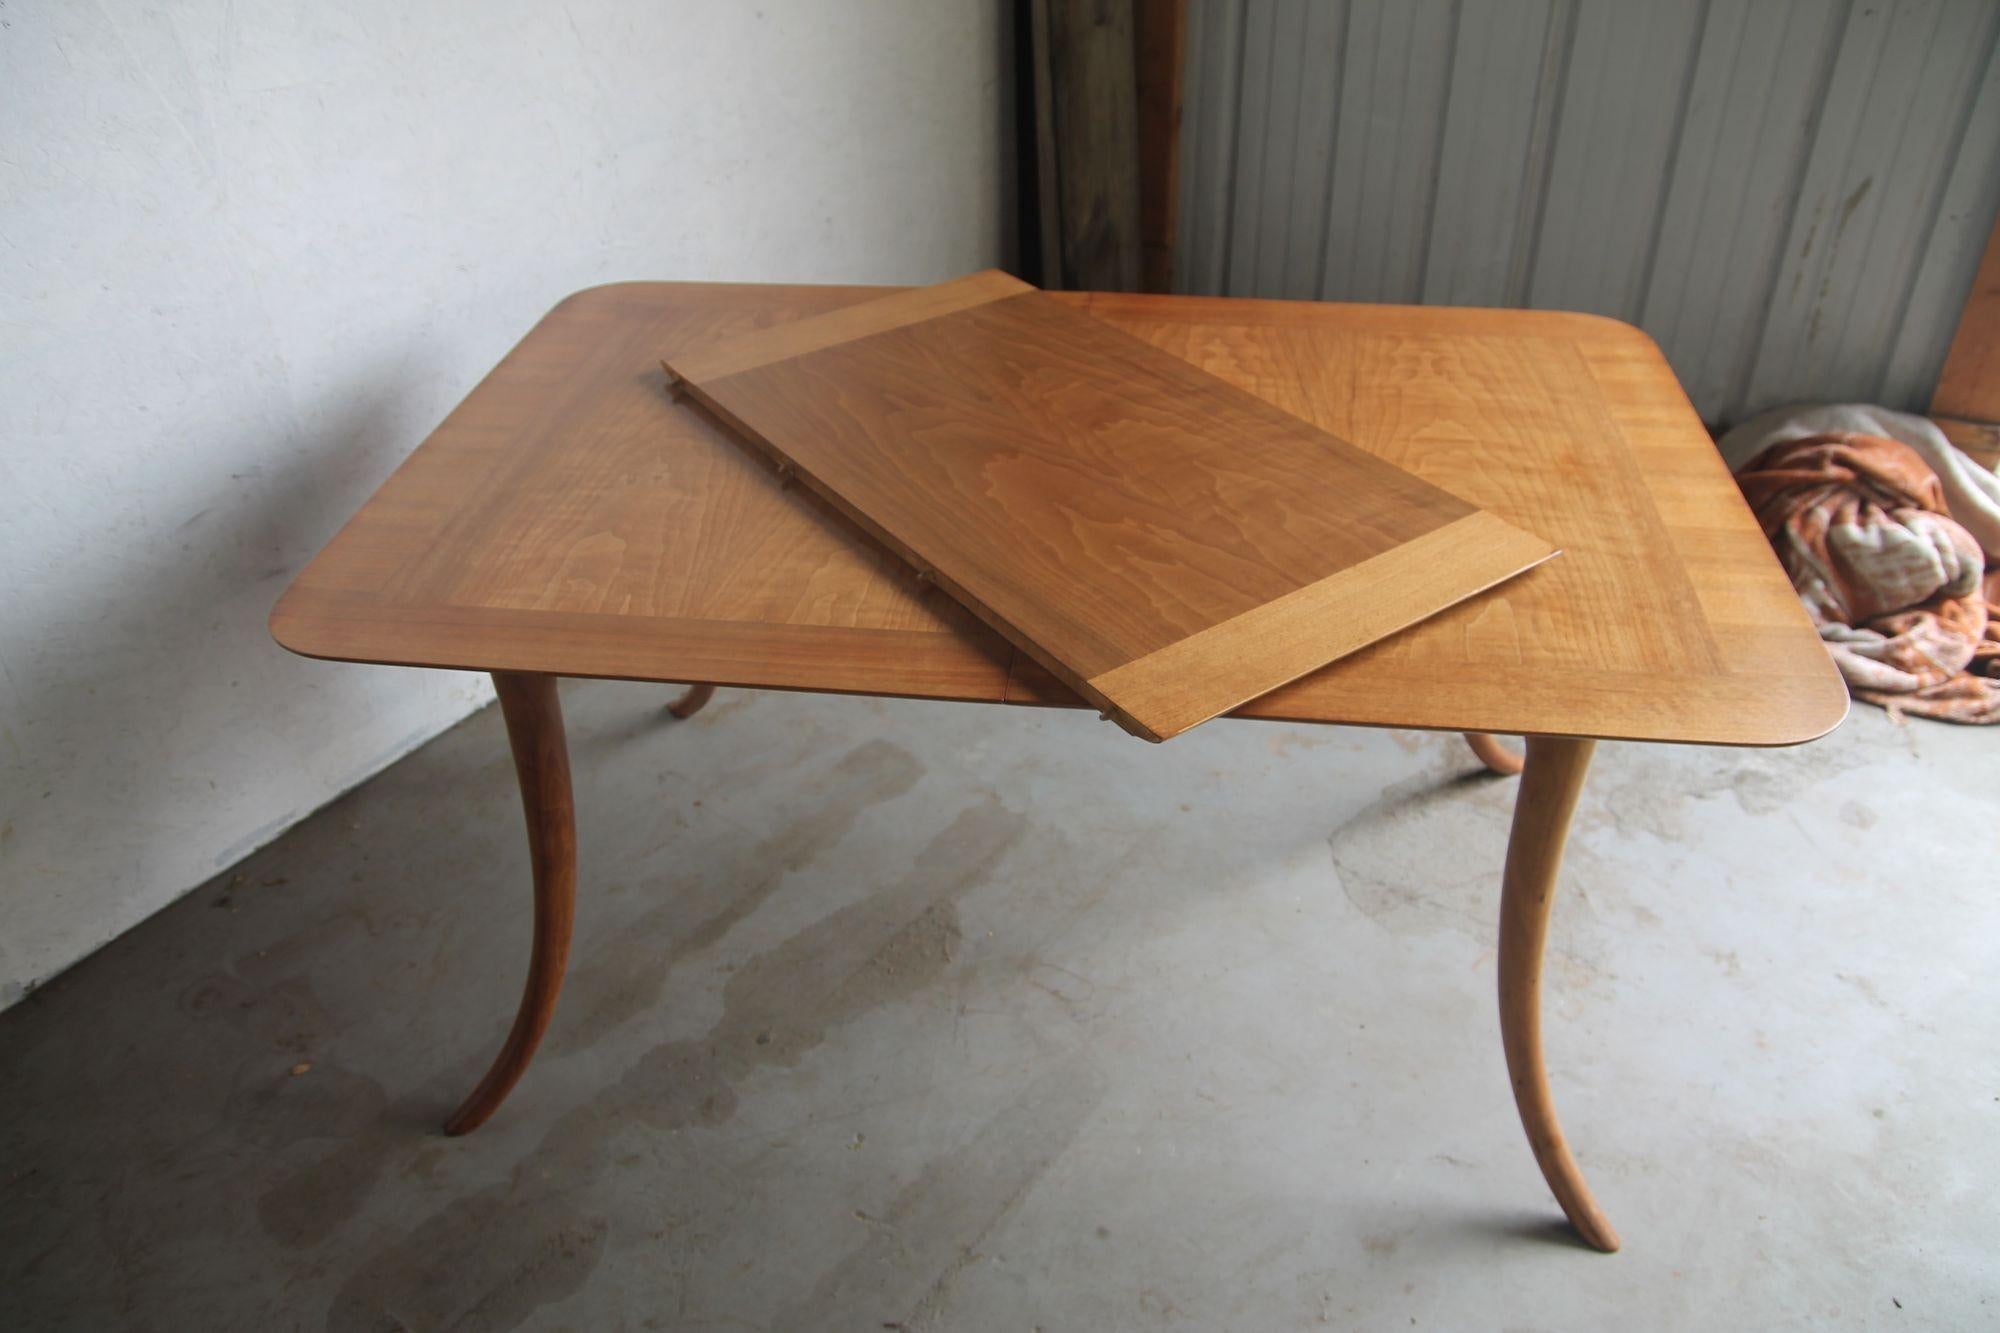 Mid-20th Century Sabre Leg Table with One Leaf by T.H. Robsjohn-Gibbings For Sale